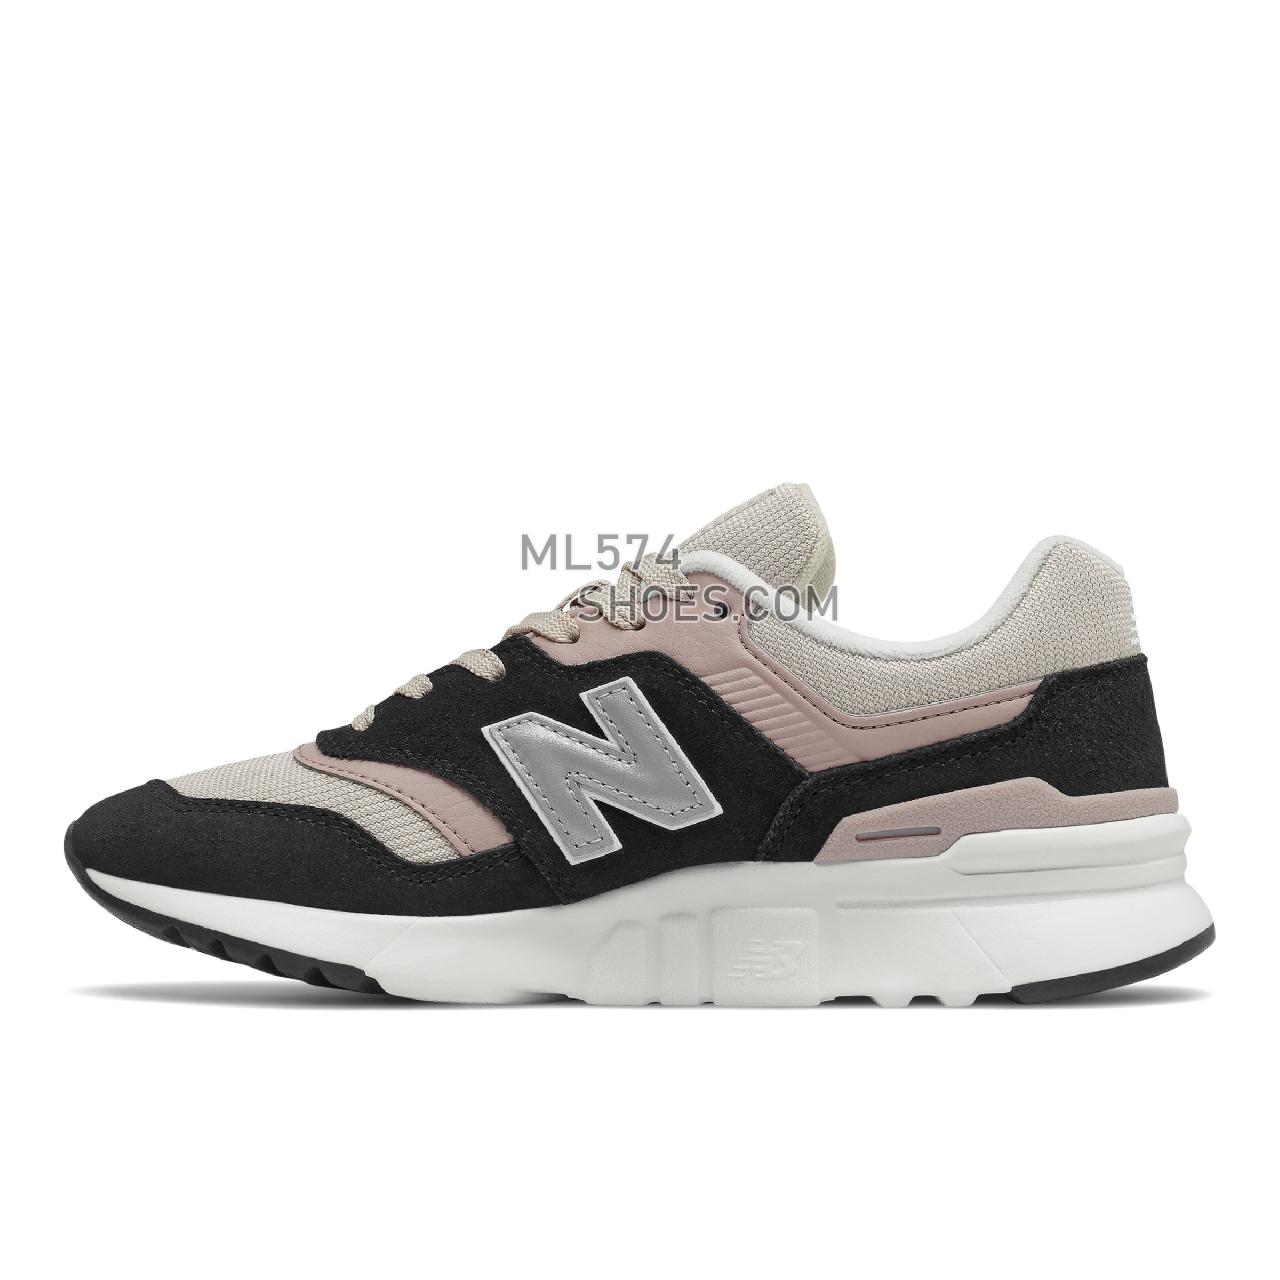 New Balance 997H - Women's Classic Sneakers - Black with White - CW997HTK